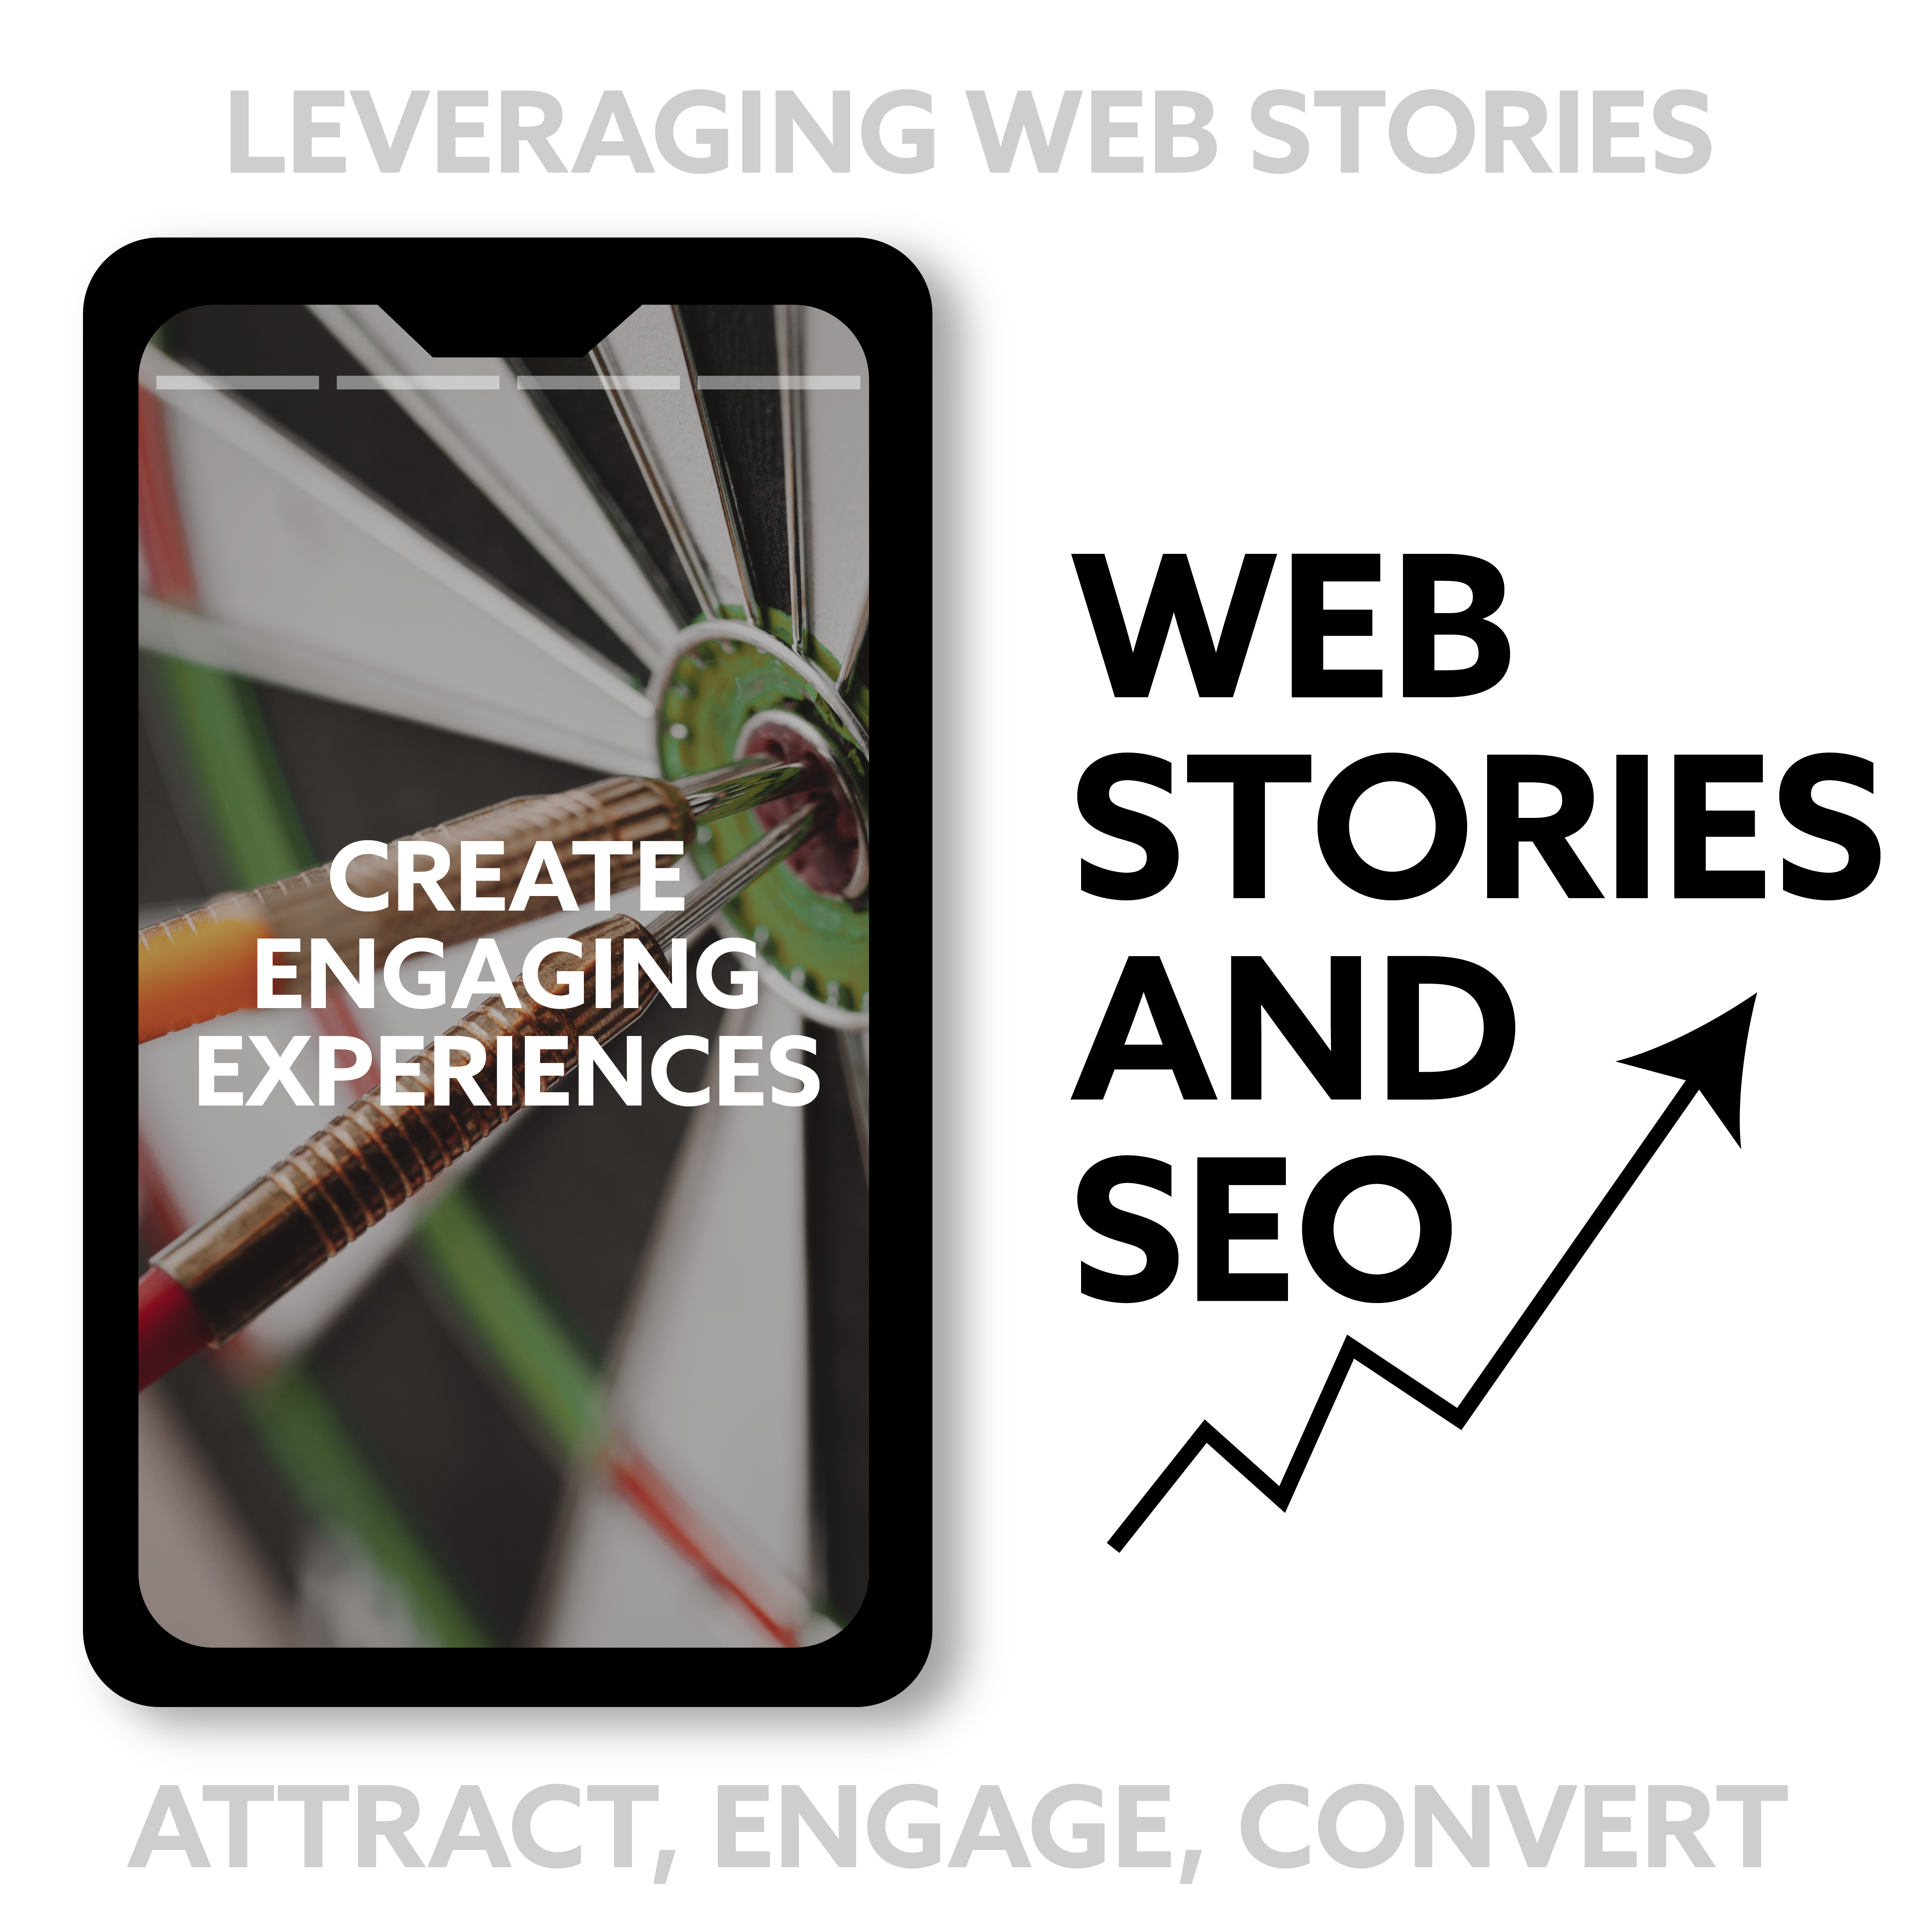 Google Web Stories and SEO